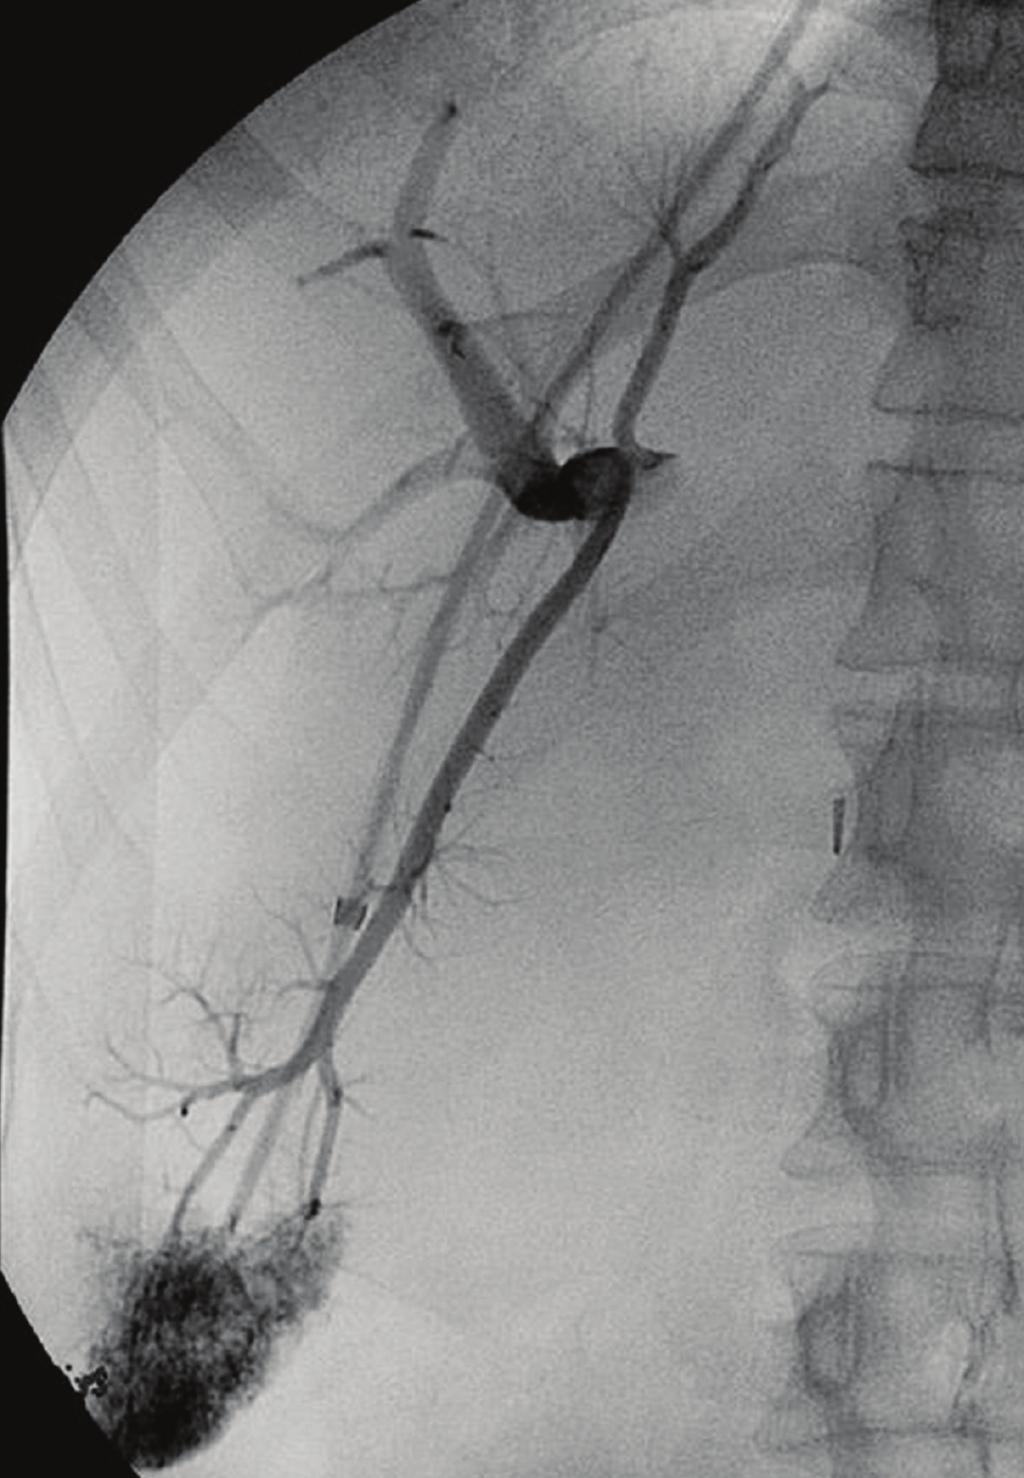 2 International Journal of Hepatology Figure 2: Tract dilatation using a 10 mm angioplasty balloon catheter. The narrowed part of the balloon is in the intraparenchymal part of the tract (arrows).